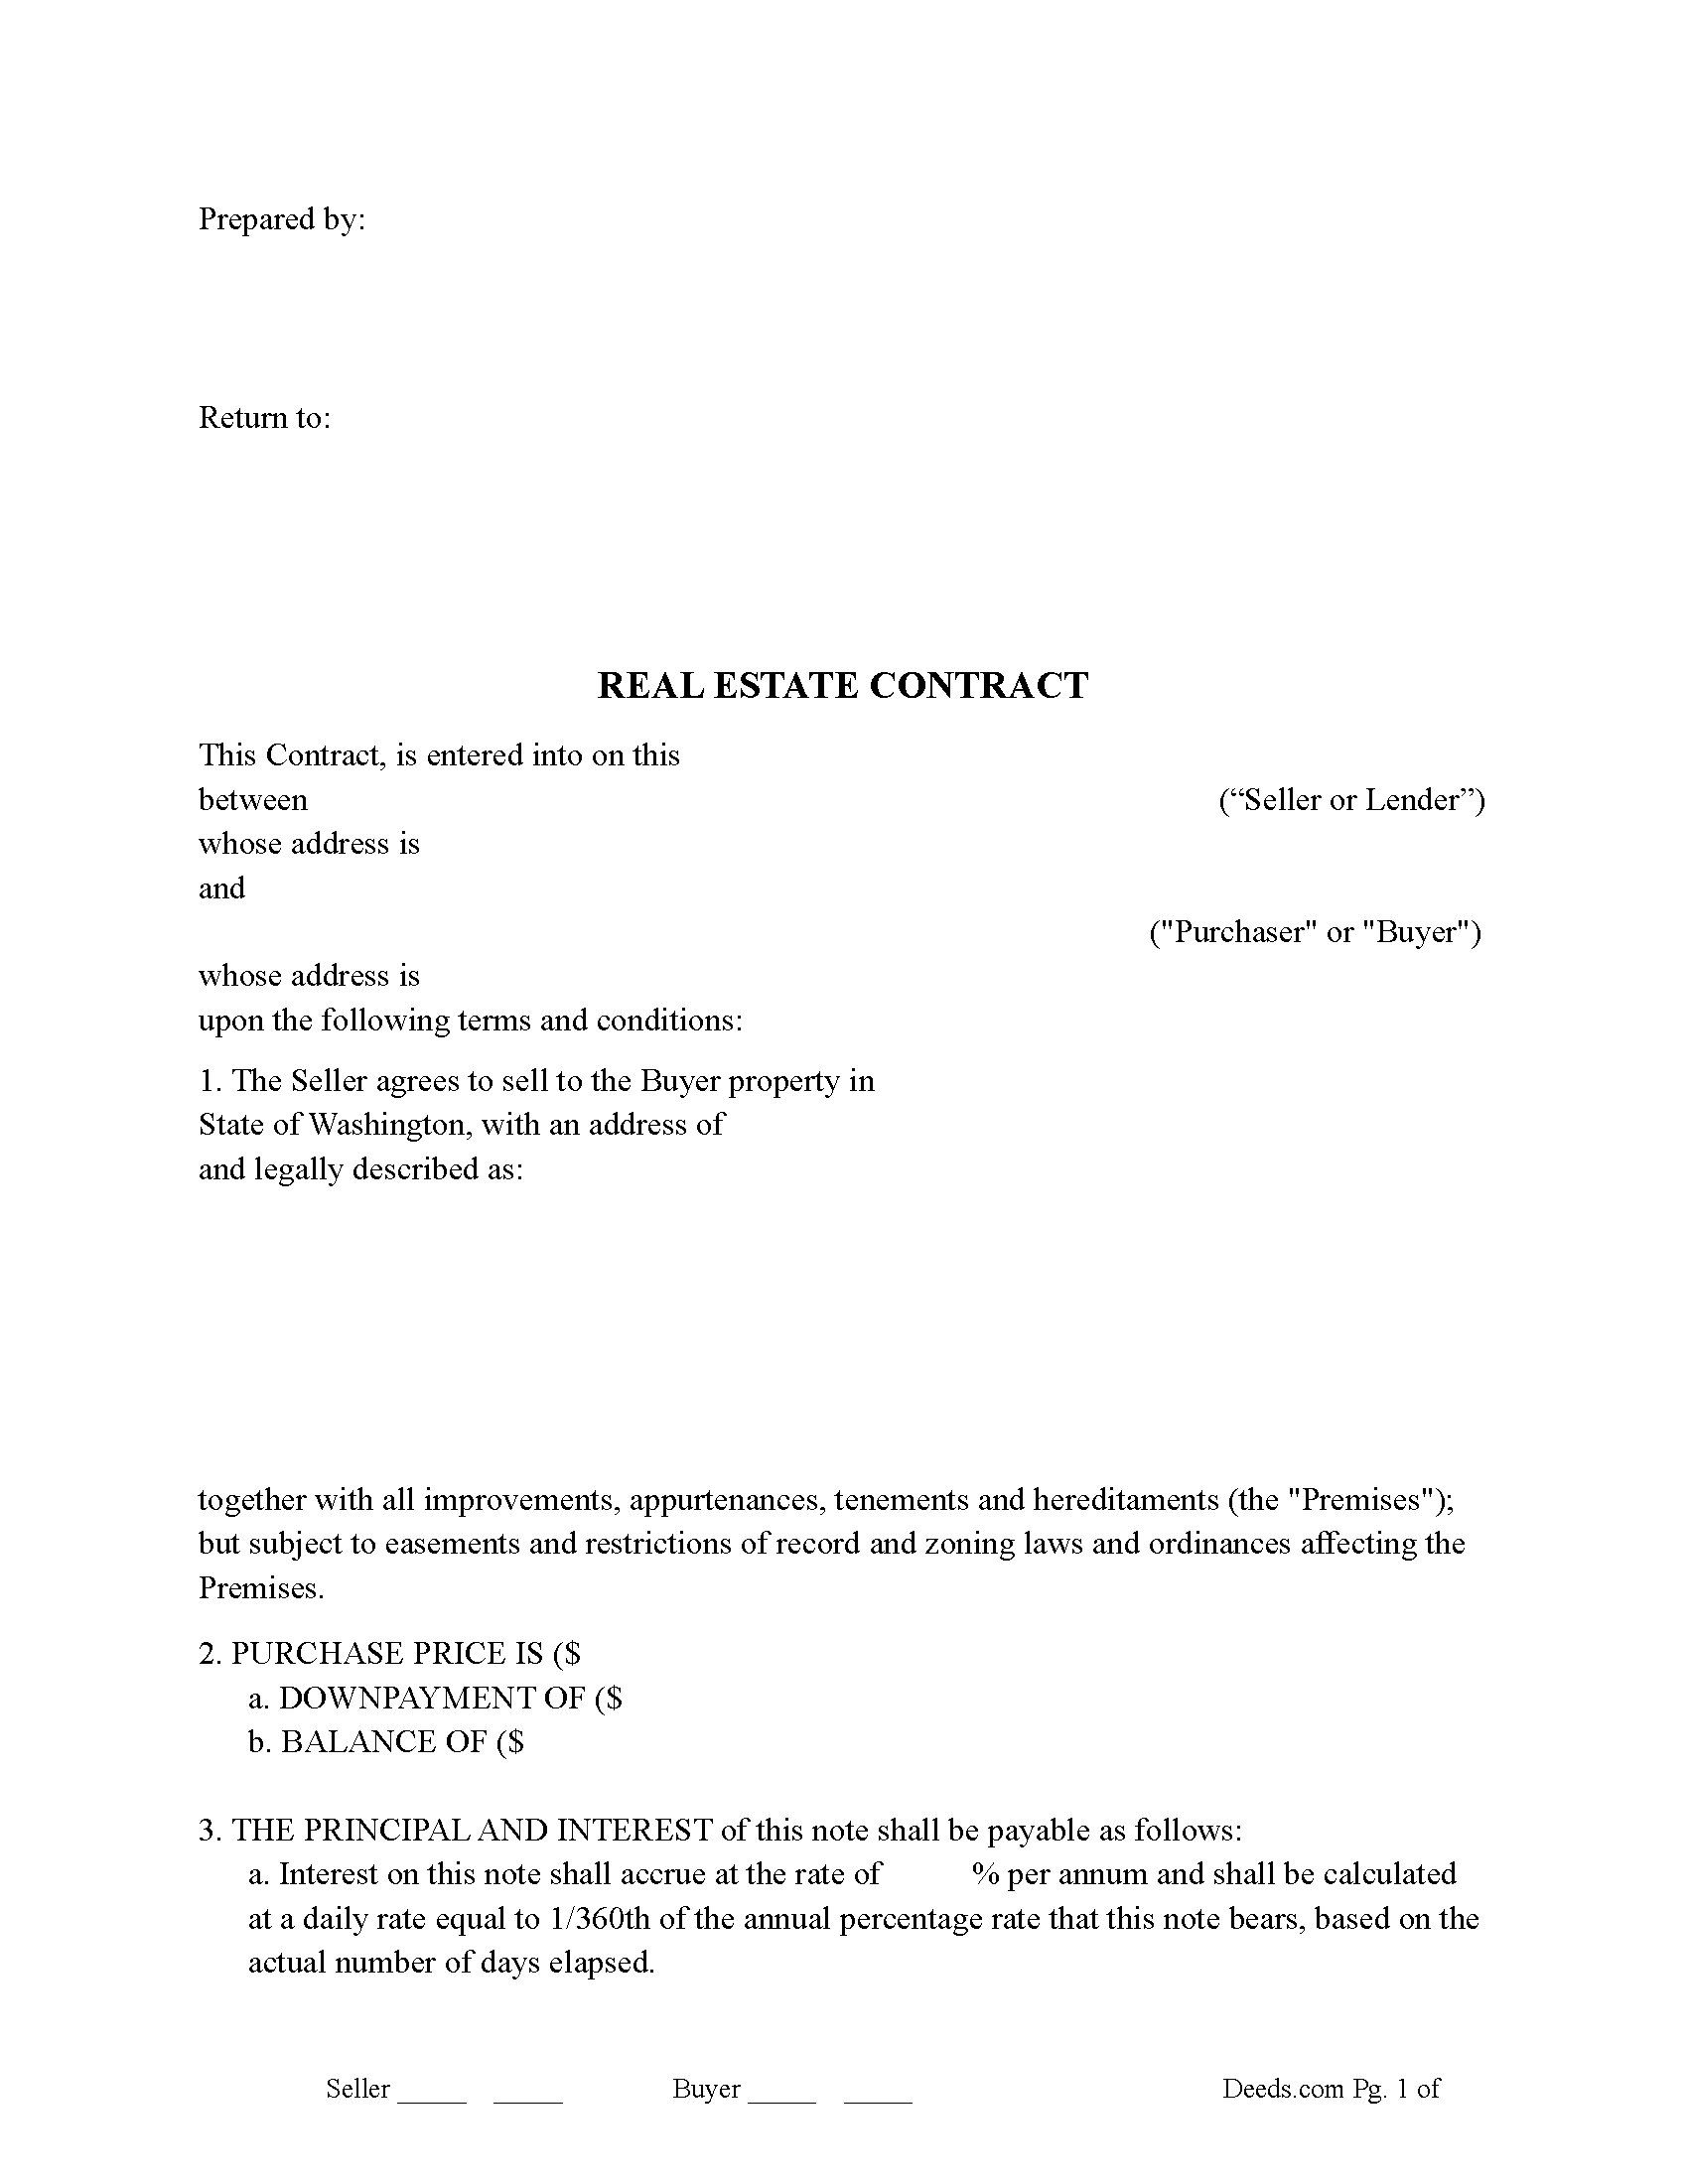 Grant County Real Estate Contract Form